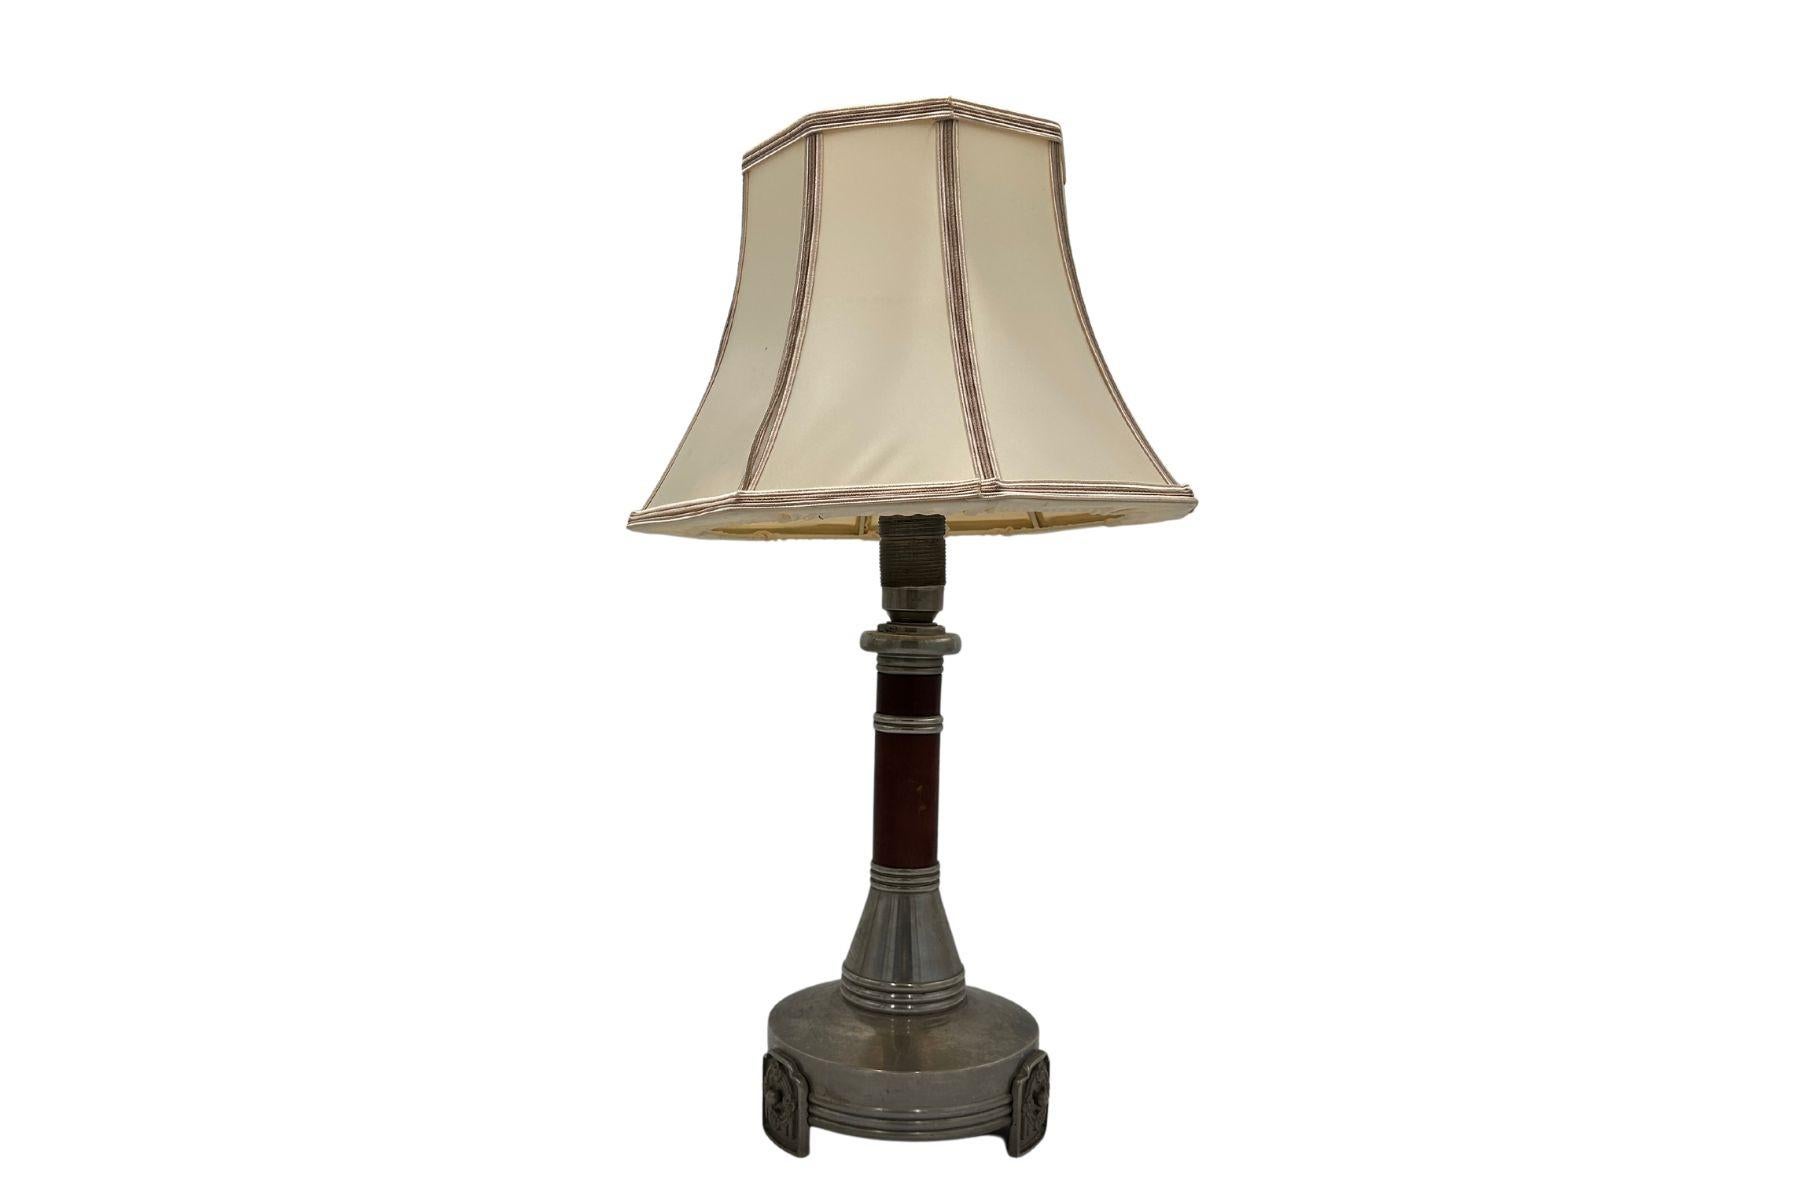 Table lamp designed by Just Andsersen in Scandinavia in the 1920s/30s.

Very good condition.

height with shade 55cm, height without shade 36cm, base diameter 15cm